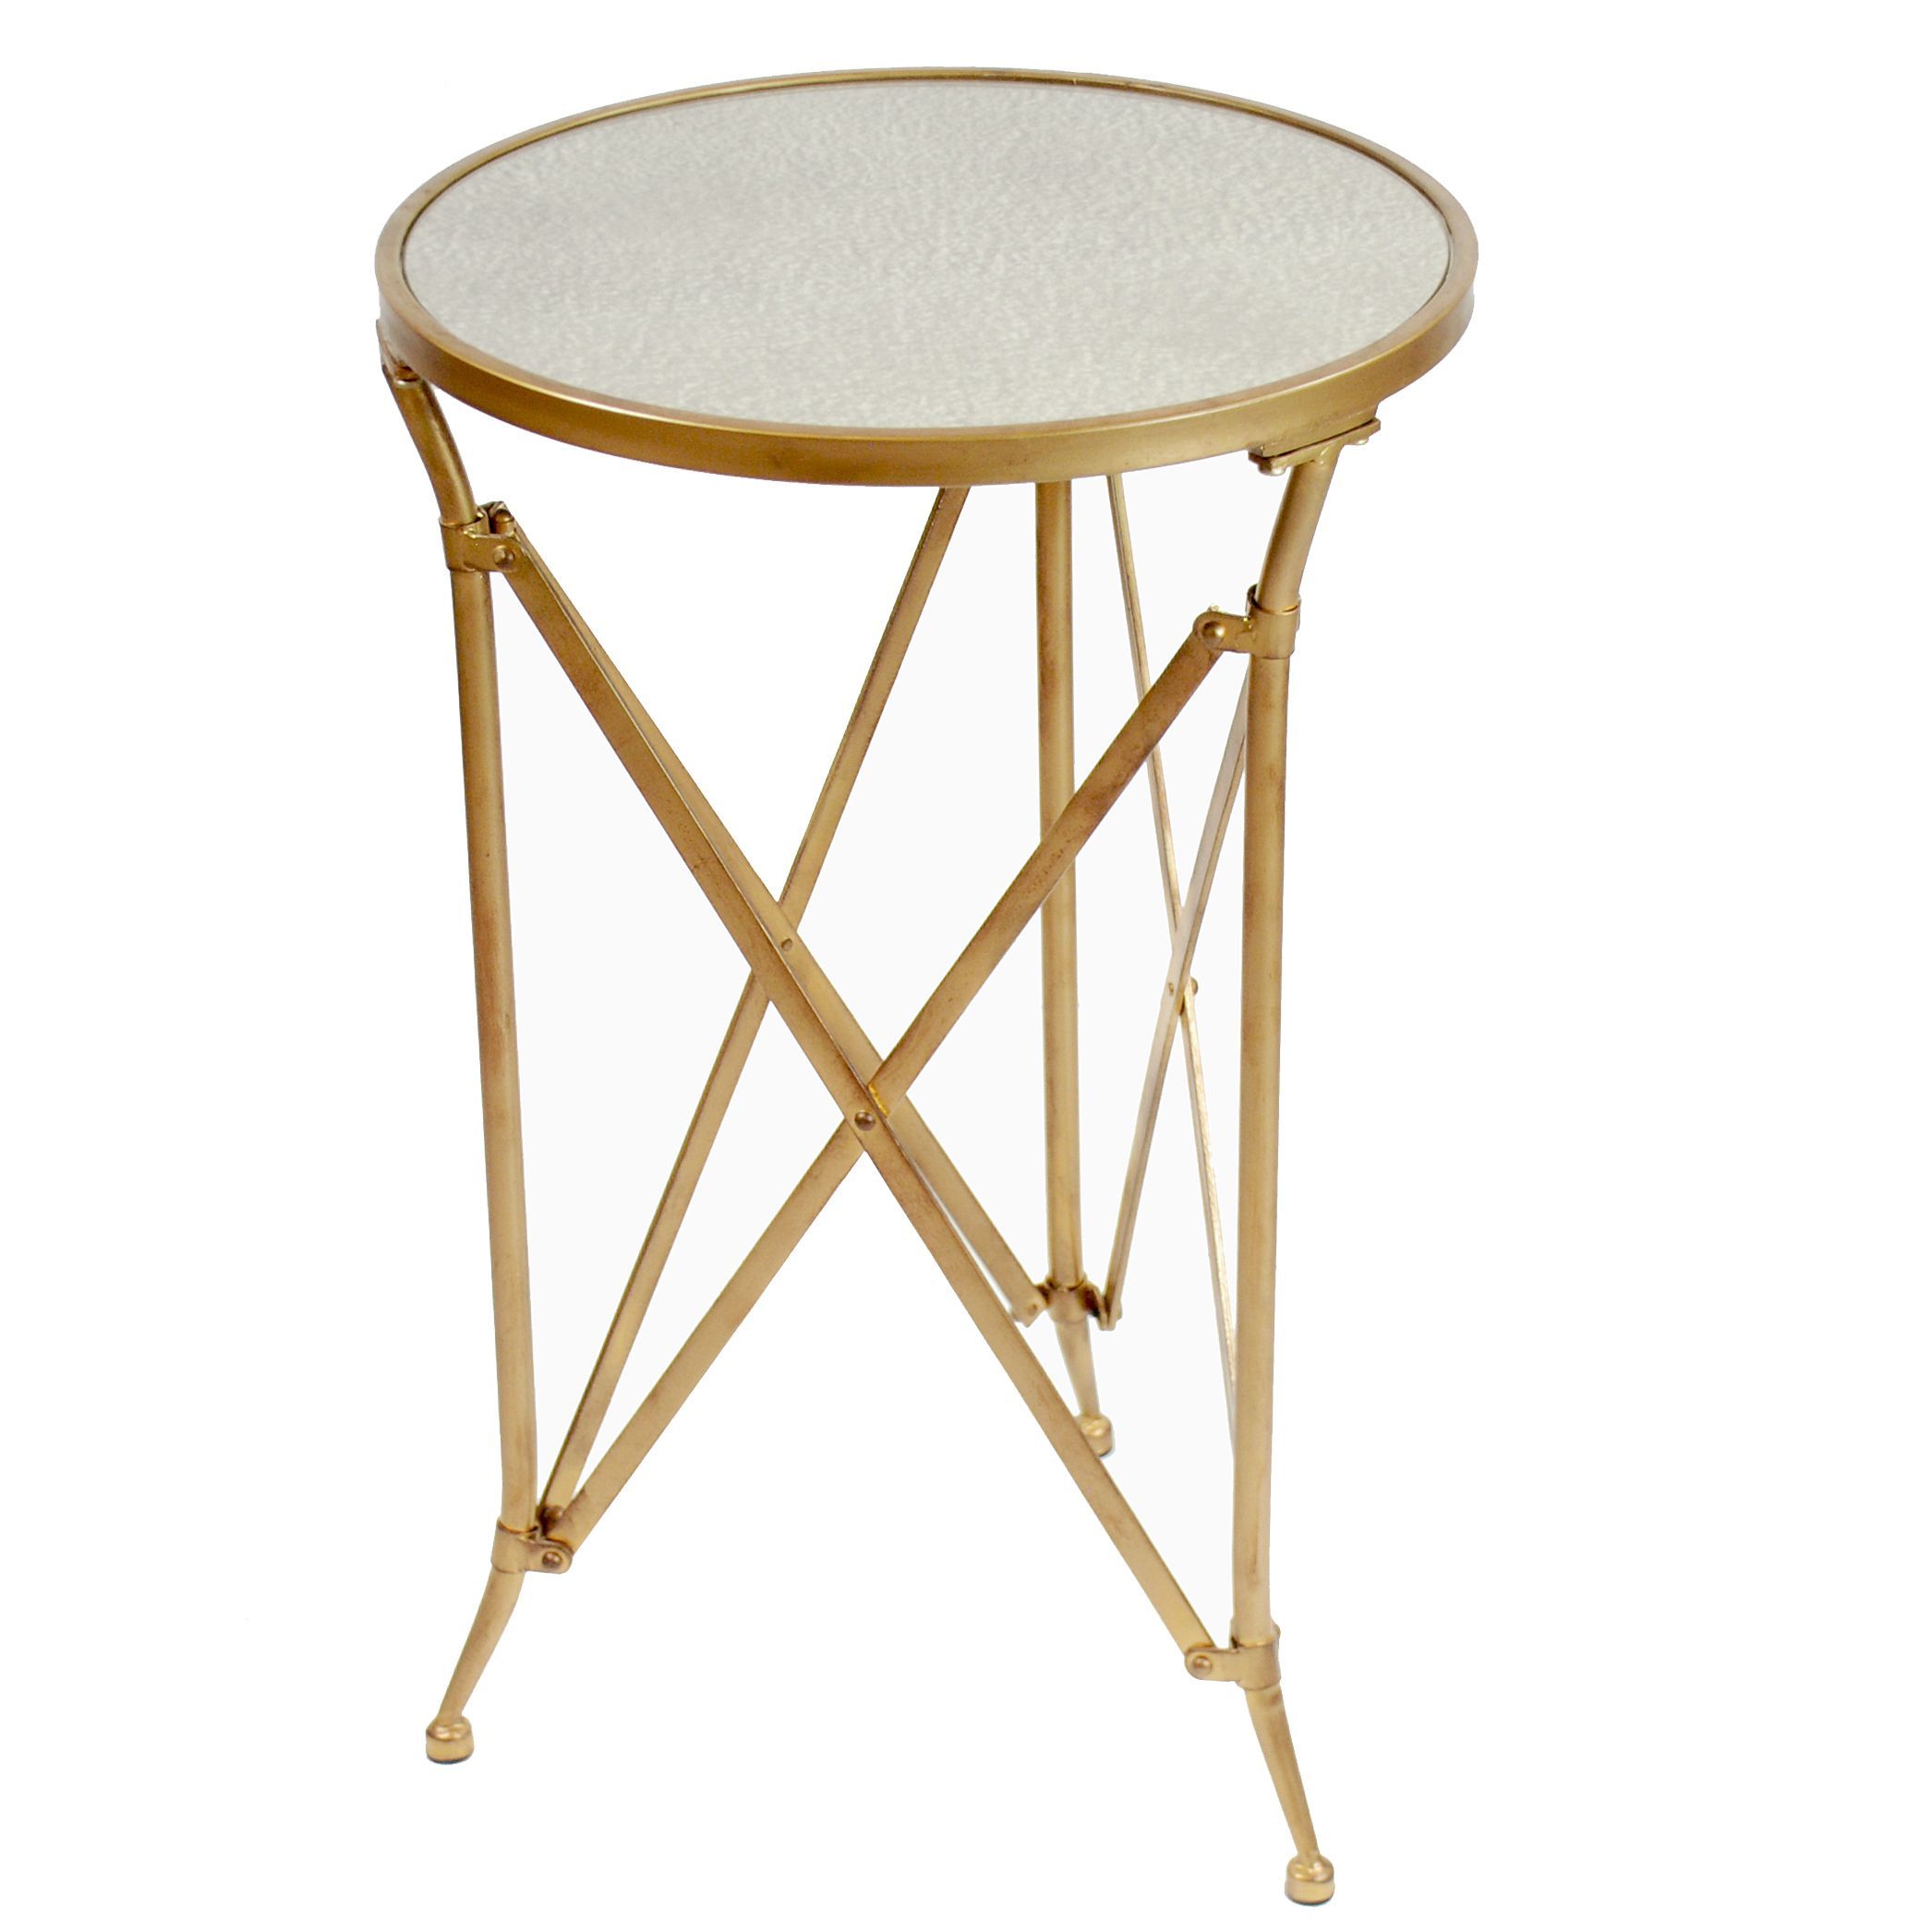 $18rround Accent Table With Antique Gold Metal Frame And Pertaining To Antique Gold And Glass Console Tables (View 7 of 20)